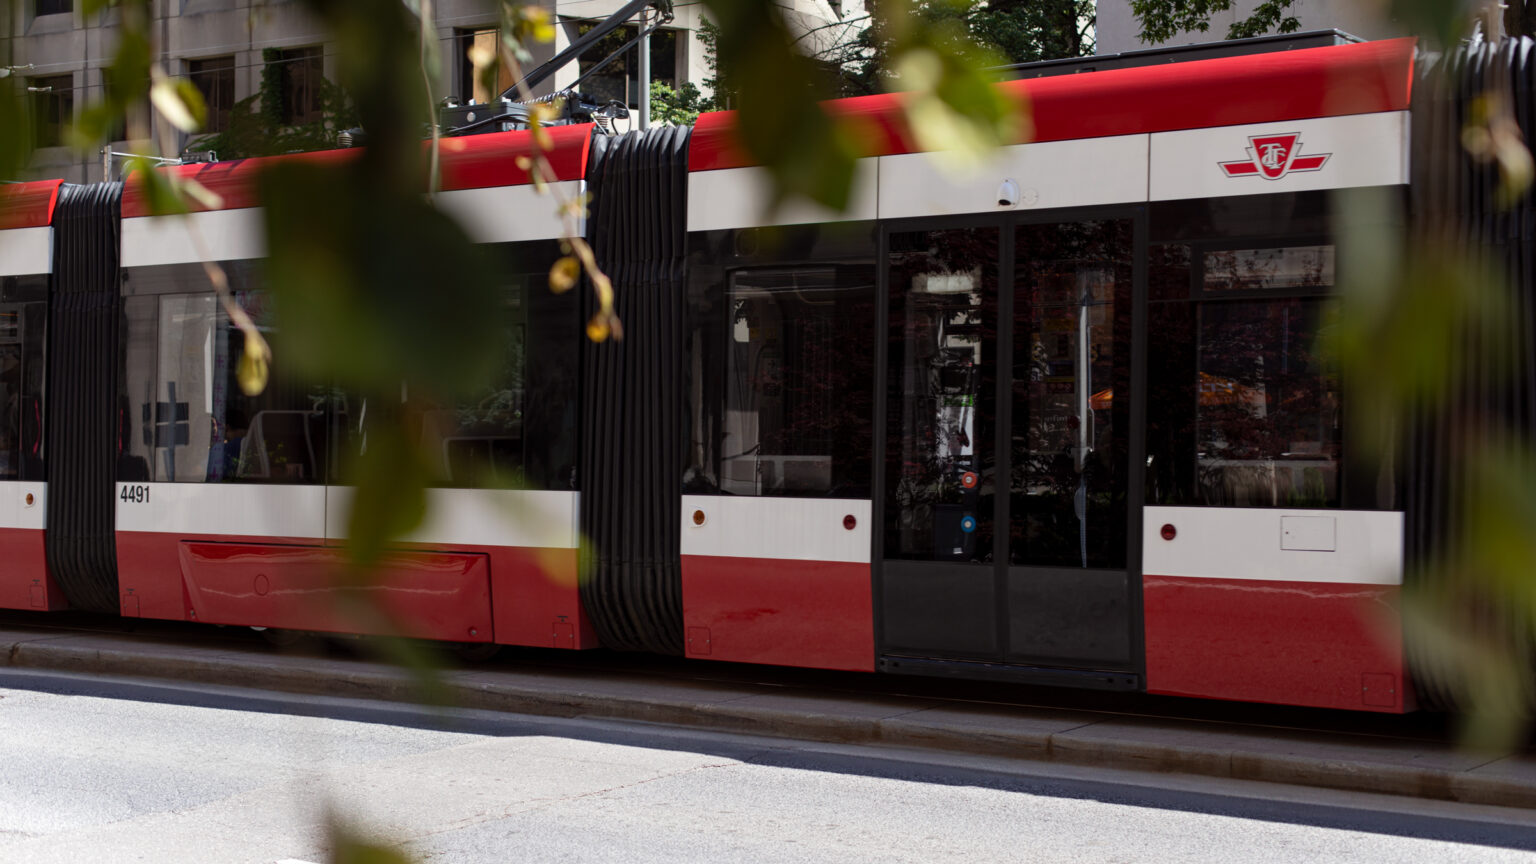 Photo of the St Clair TTC Streetcar, a transit amenity located directly at Resident's Deer Park development